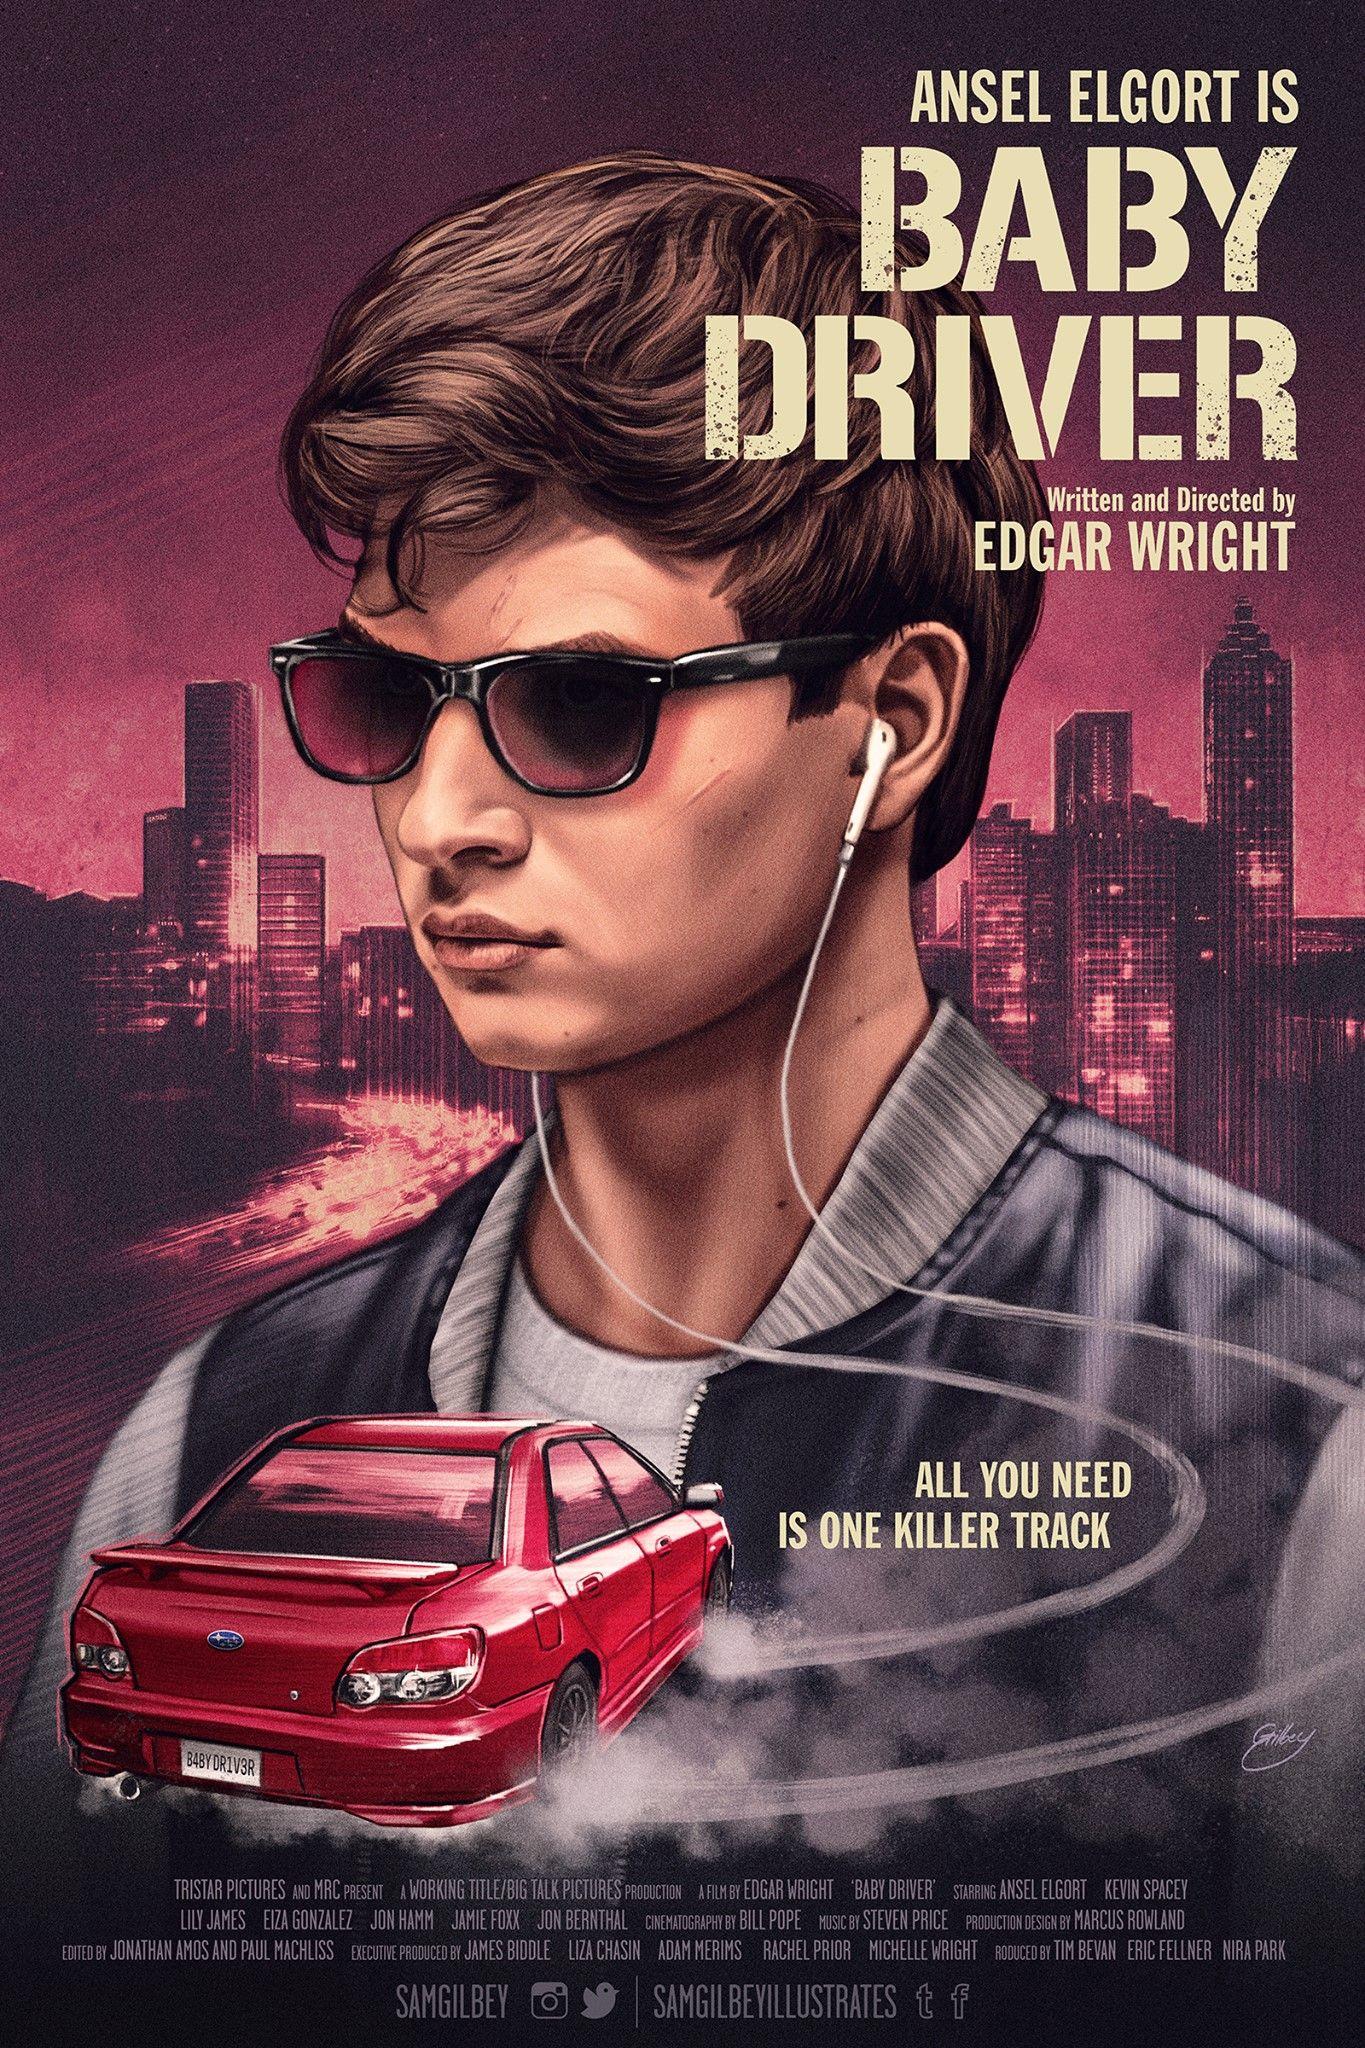 Baby Driver movie poster by Sam Gilbey. Movie & TV Posters